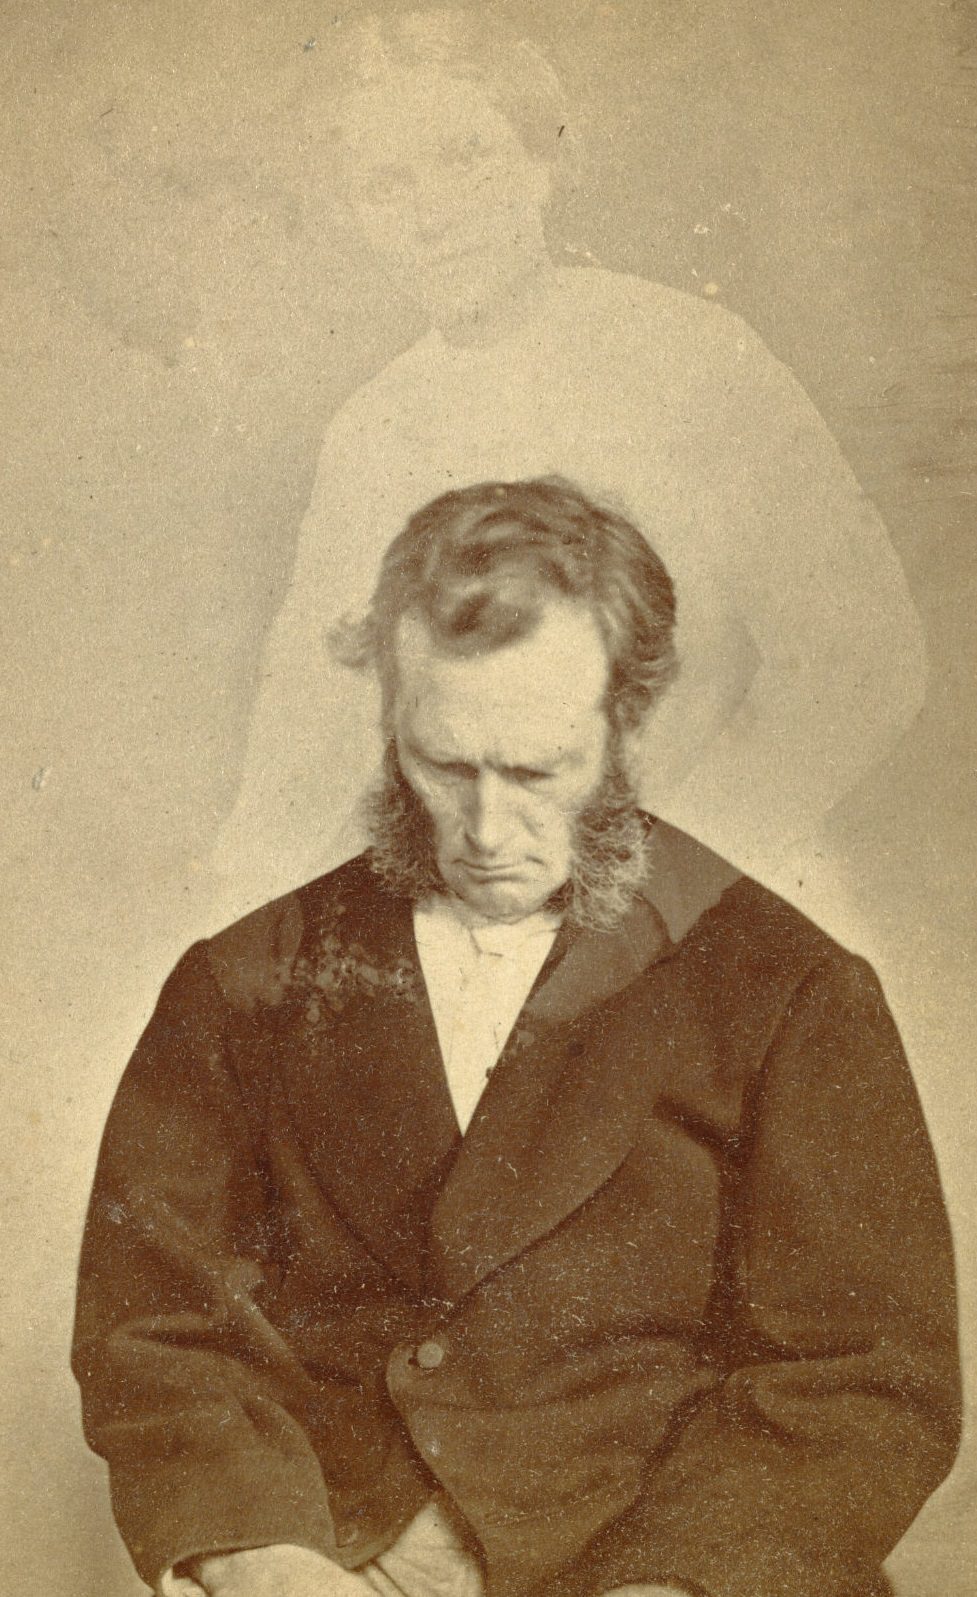 Portrait of Bronson Murray with full sideburns looking down. A faint image of a woman is visible above him.